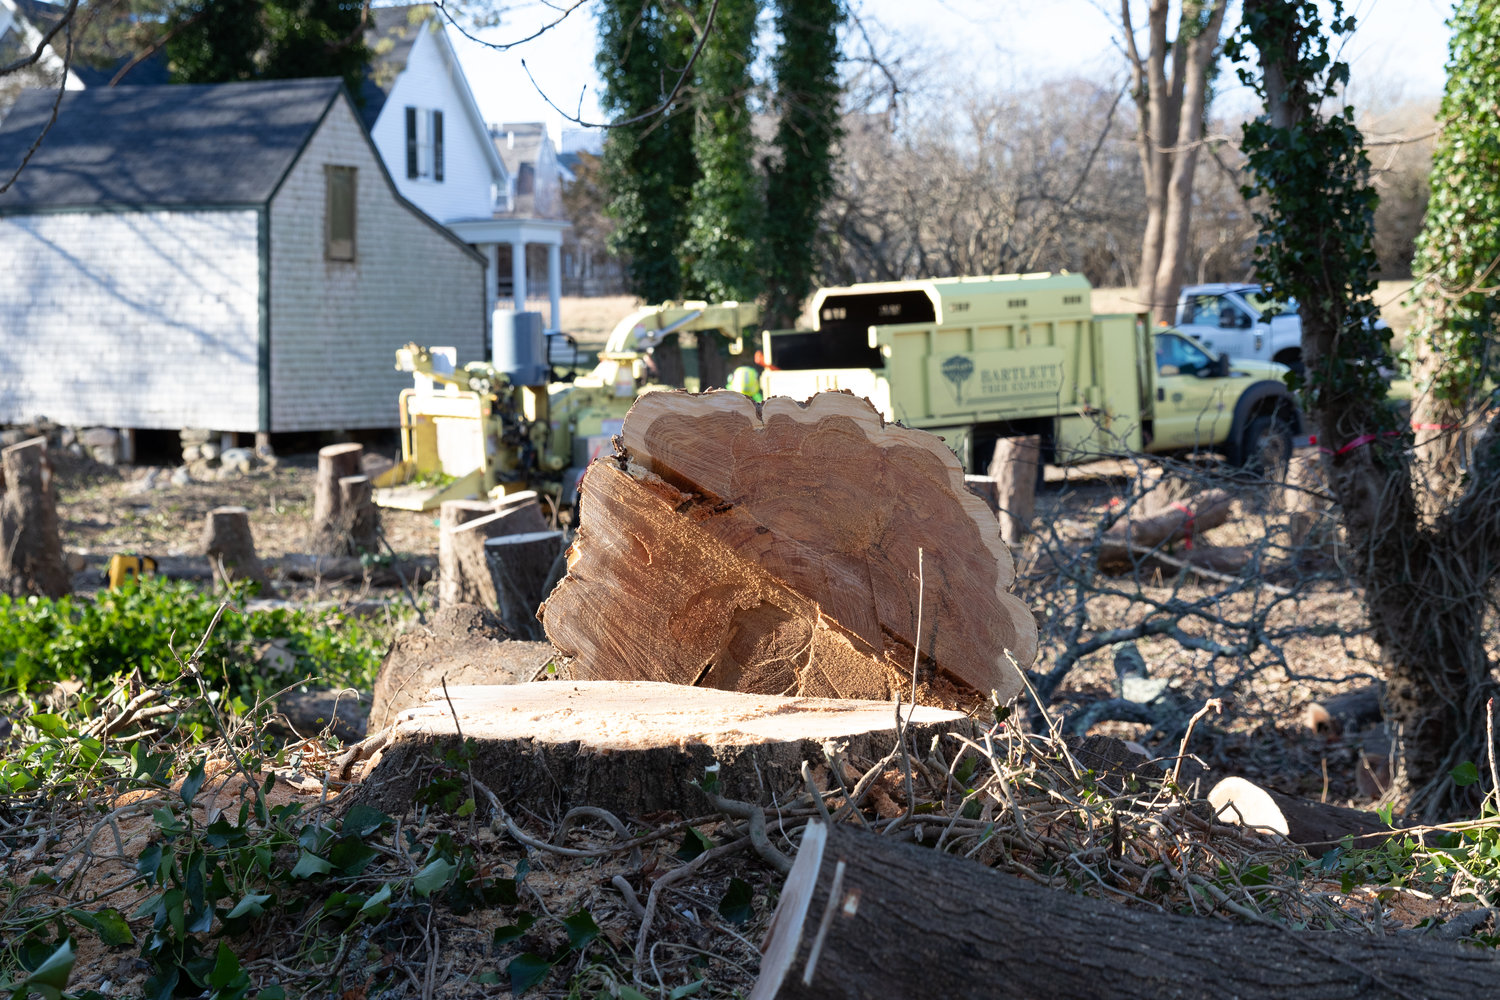 Close to two dozen trees at 57 Pleasant St. were cut down last week by Bartlett Tree Experts, dramatically altering one of the most cherished downtown landscapes next to the old white clapboard farmhouse owned by the Phelan family since 1841.